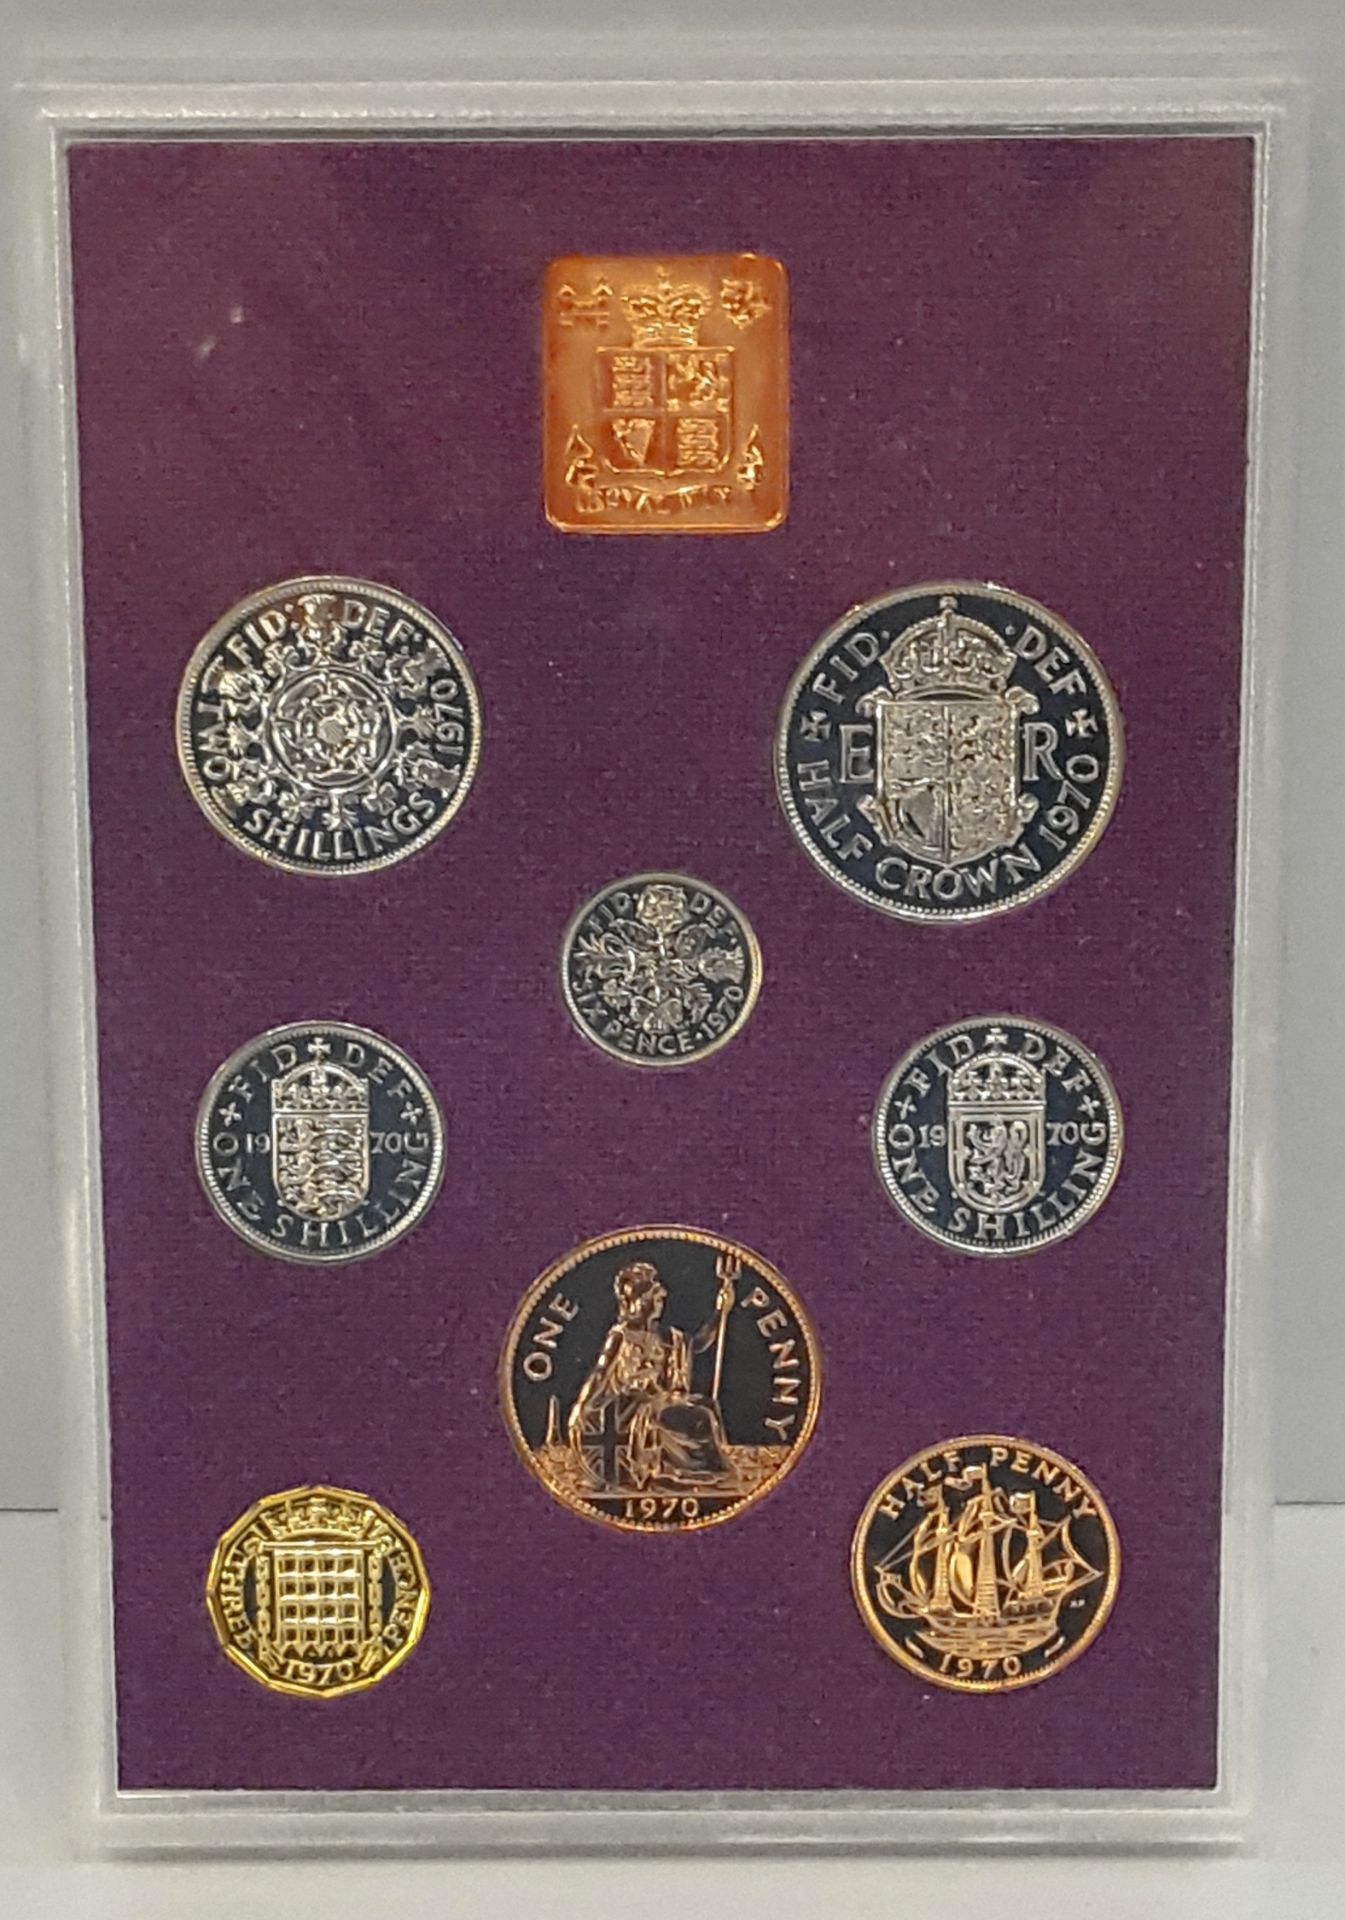 Collectable Coins GB & Northern Ireland Proof Set 1970